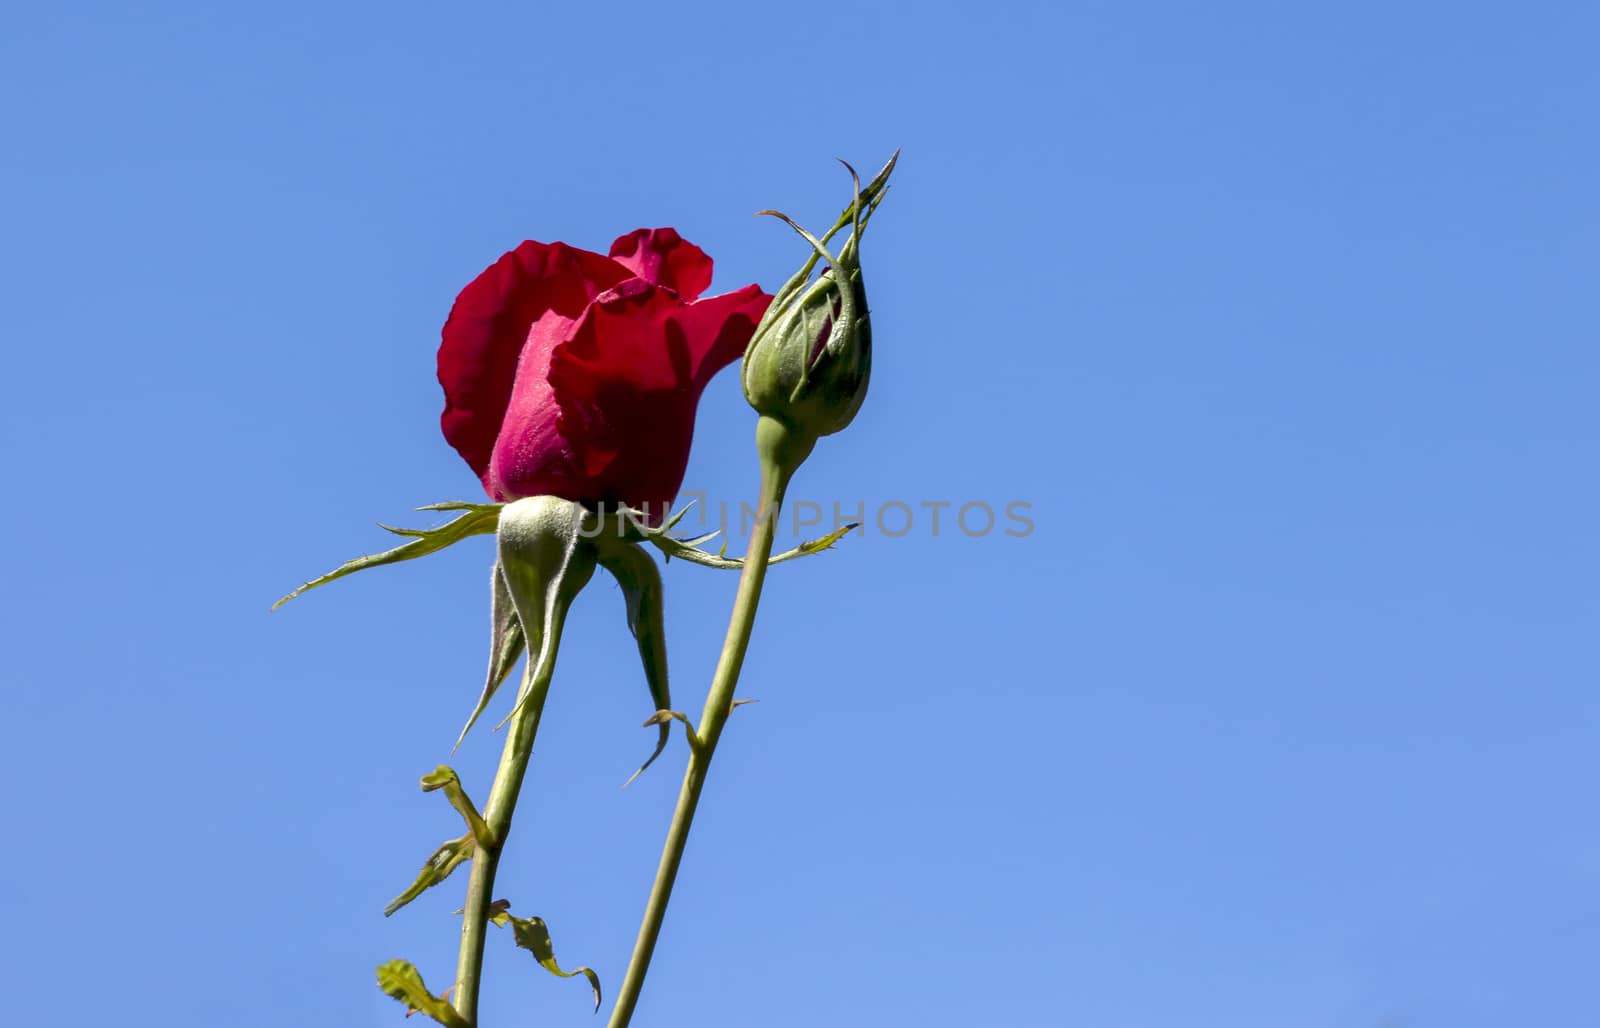 This photo was taken at a formal botanical garden near San Francisco, California. Spring had arrived, and flowers are in bloom. This image features a beautiful red roses with a deep blue sky.